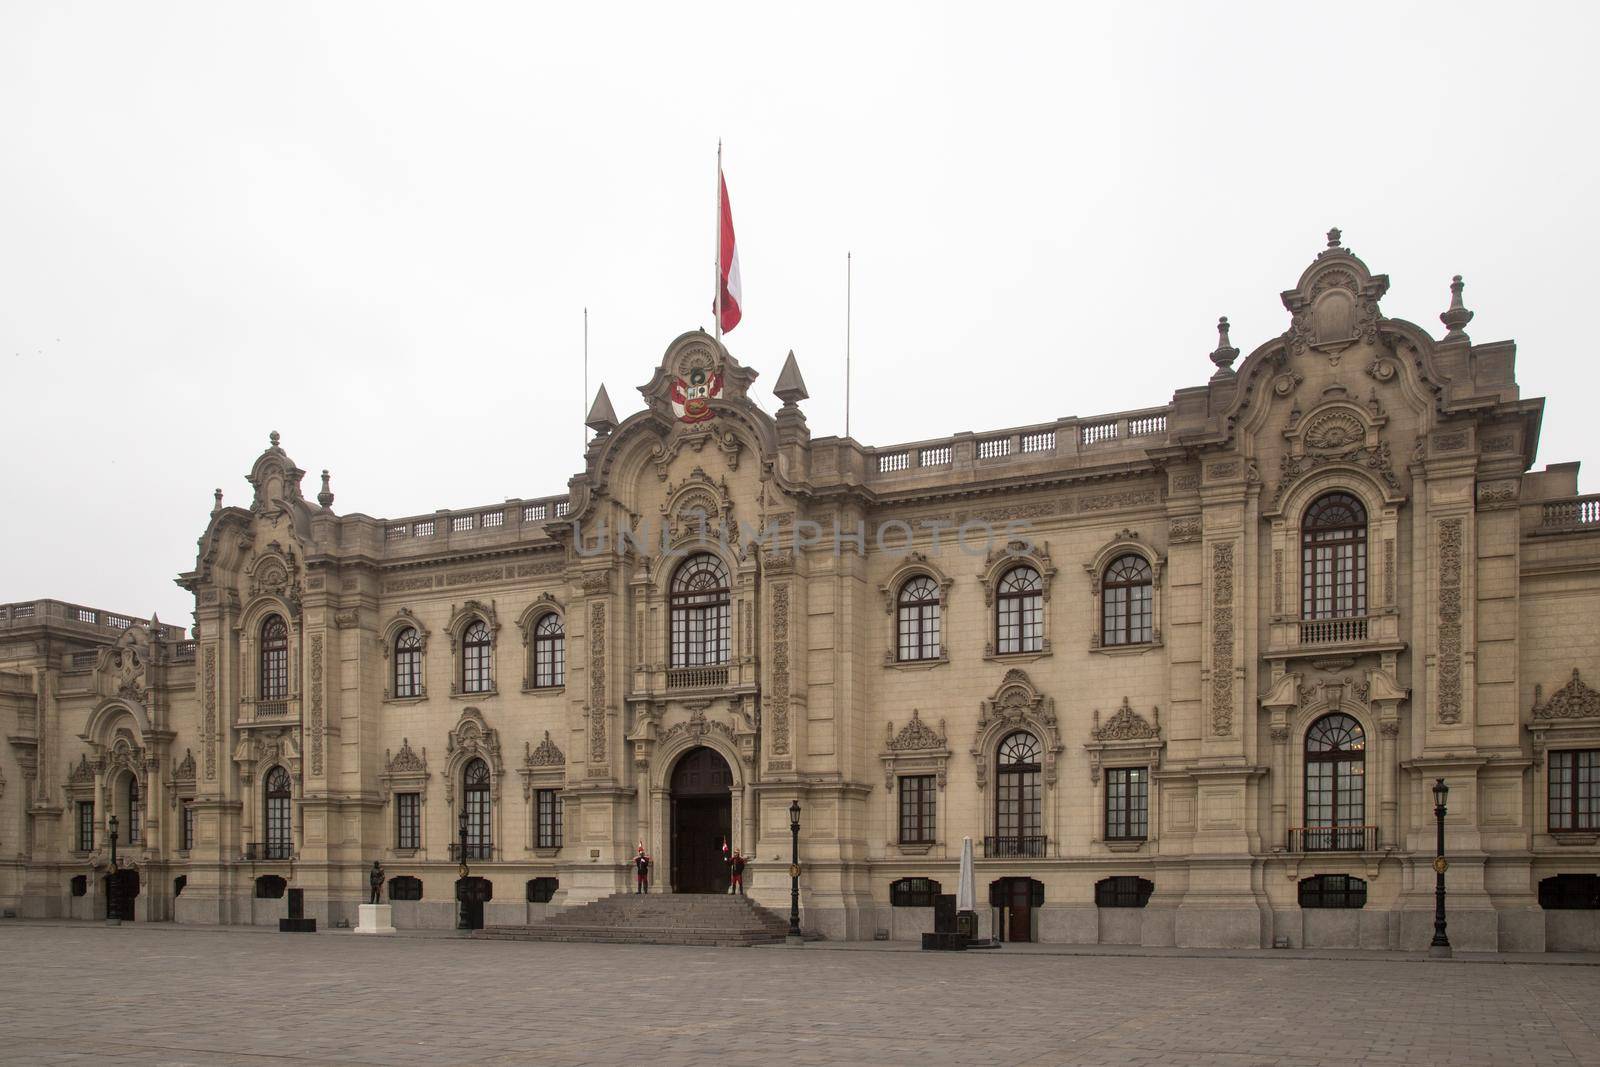 Lima, Peru - September 2, 2015: The Government Palace in the city centre with guards in front of it